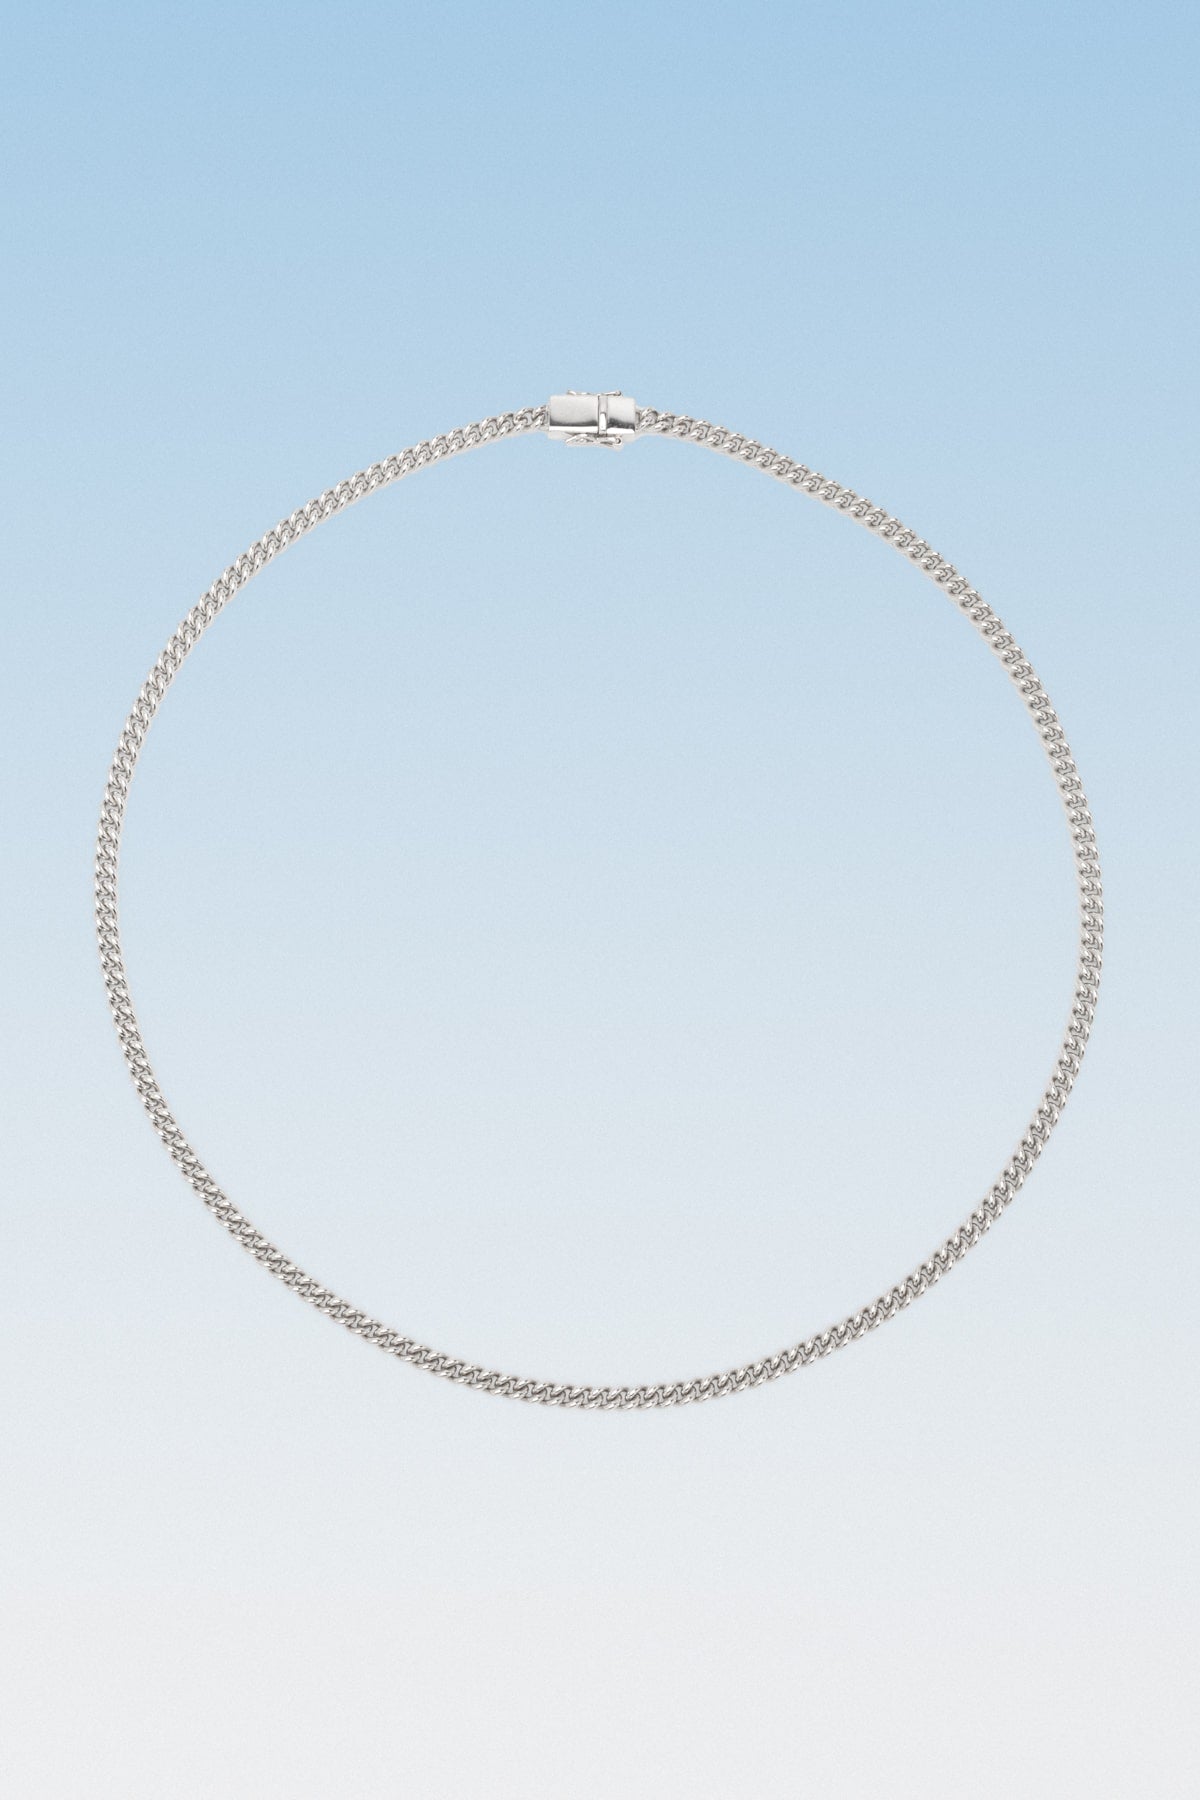 B213_Rounded Curb Chain Necklace_L_01